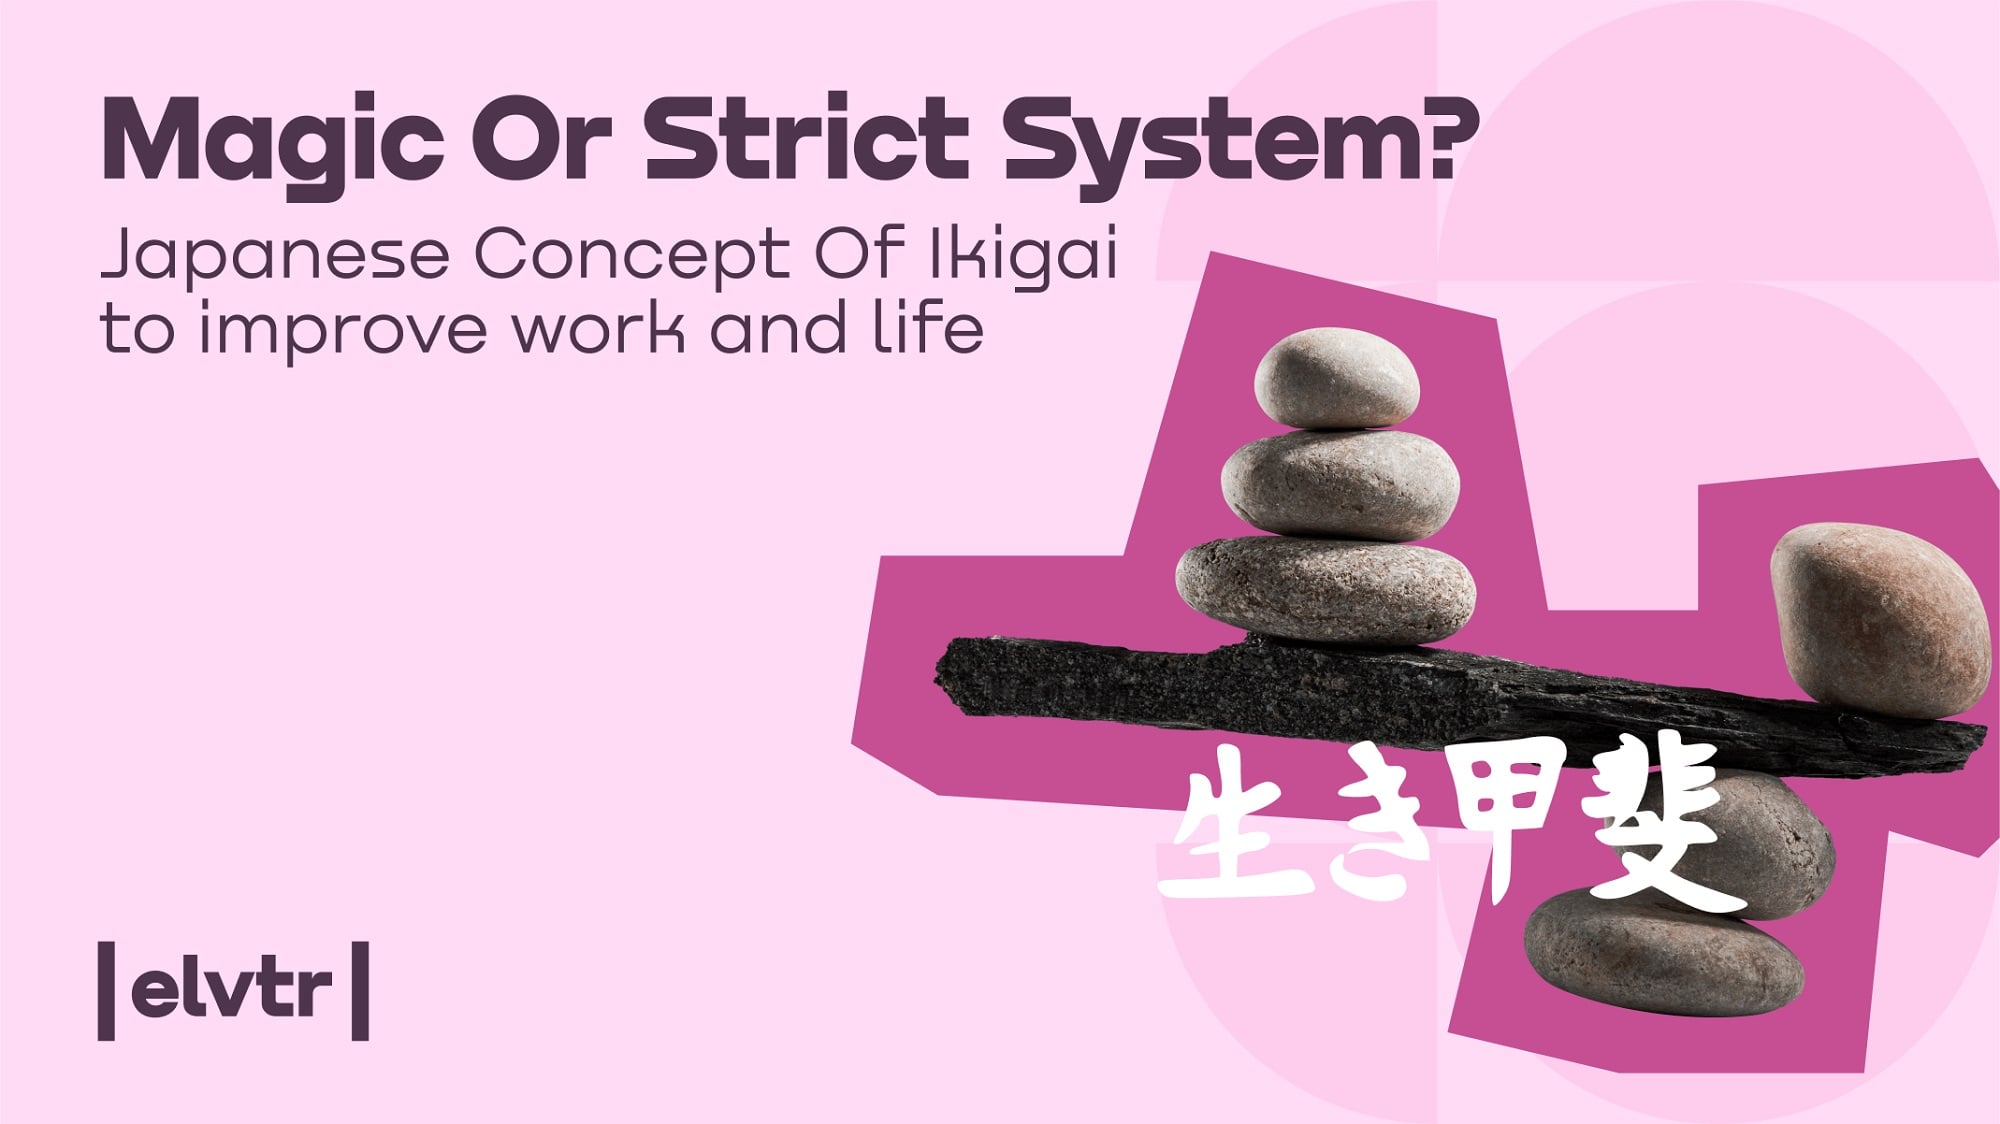 Magic Or Strict System? Japanese Concept Of Ikigai to improve work and life image